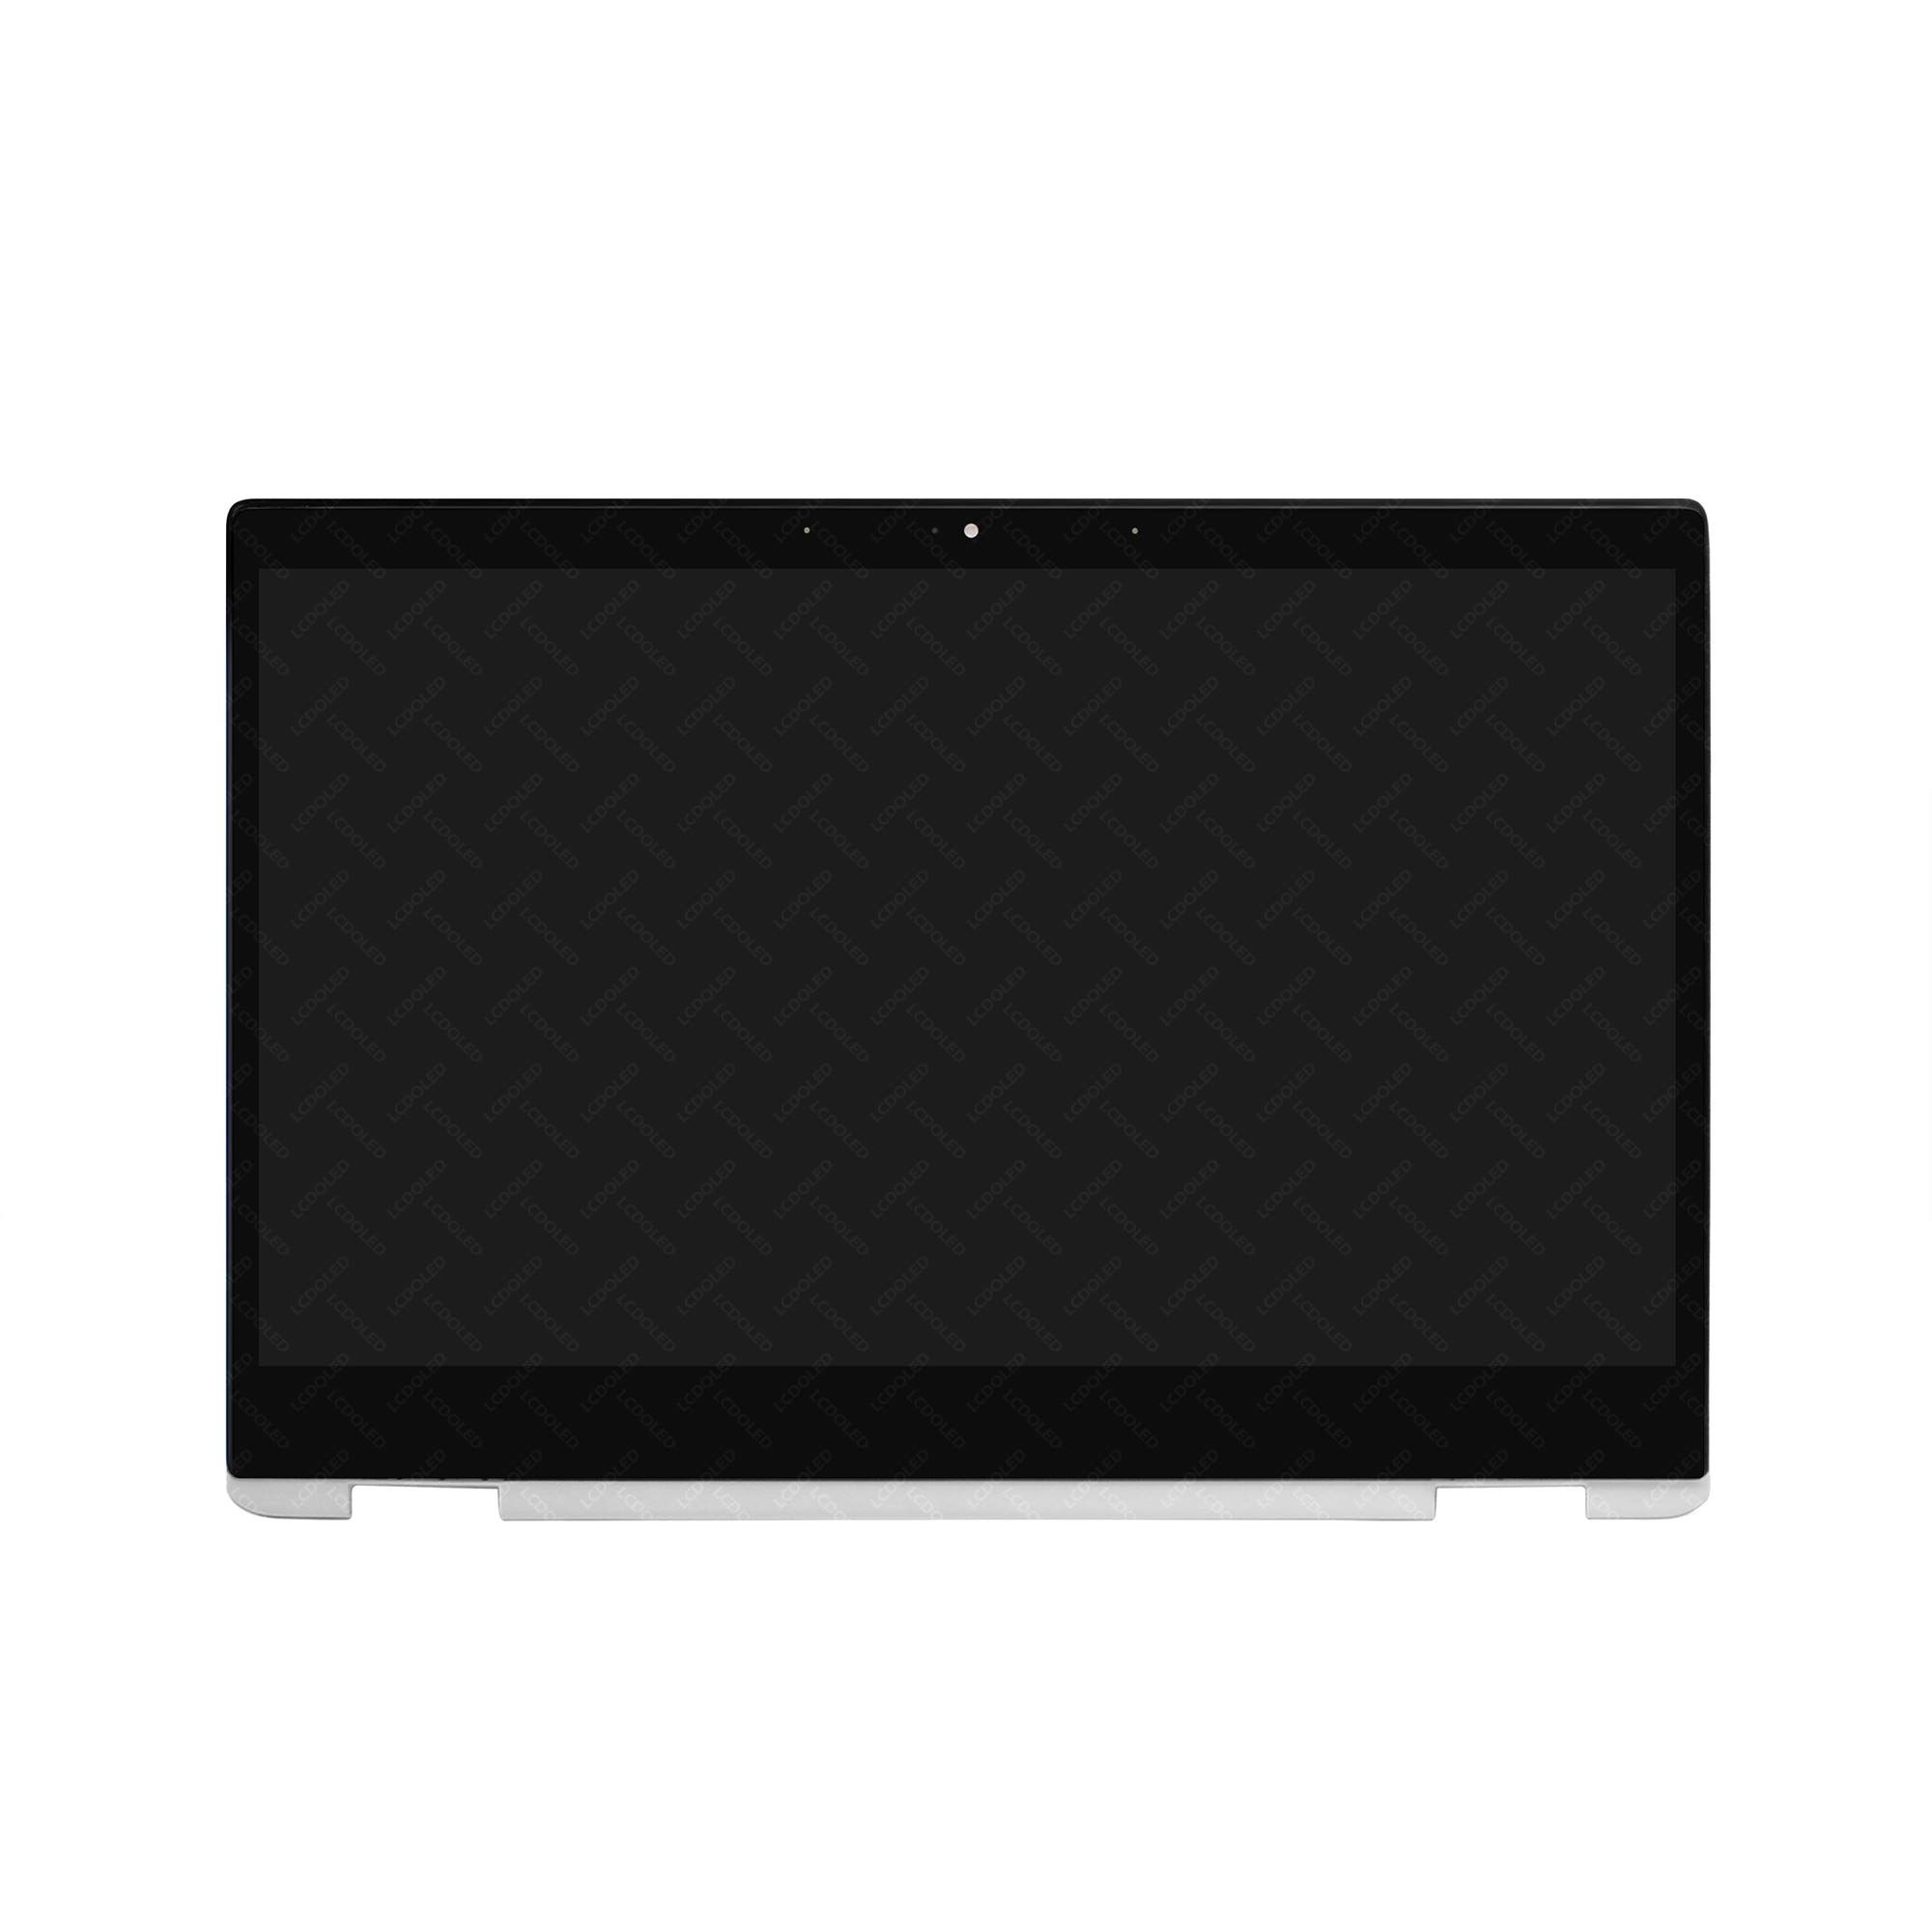 LCDOLED Replacement 14.0 inches FullHD 1920x1080 LCD Display Touch Screen Digitizer Assembly Bezel with Board for HP Chromebook x360 14b-ca0013dx 1...